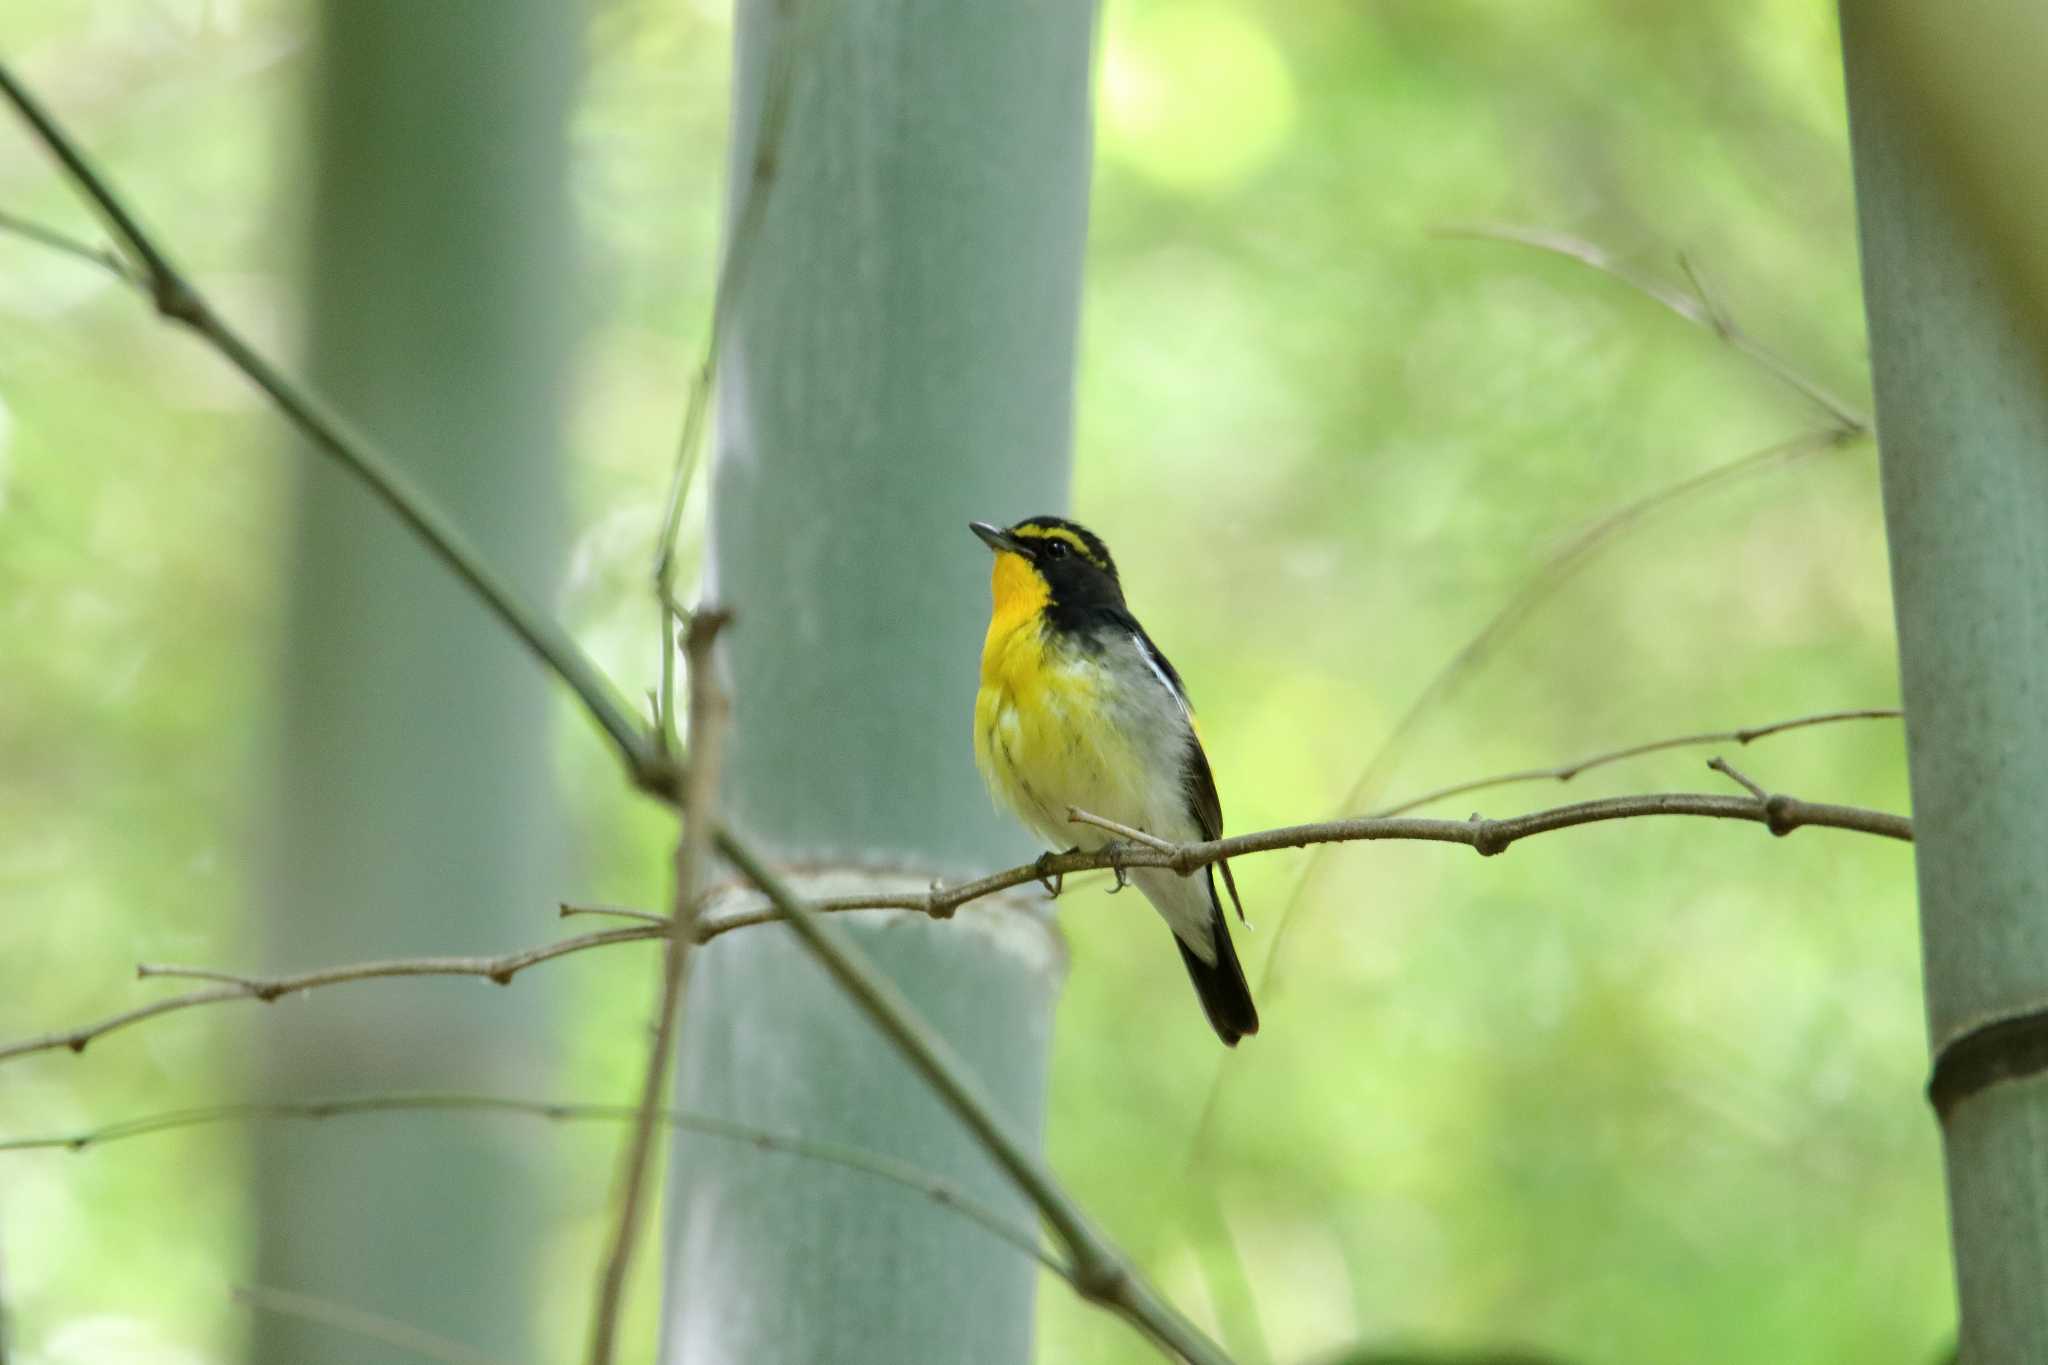 Photo of Narcissus Flycatcher at 瀬上市民の森 by shin